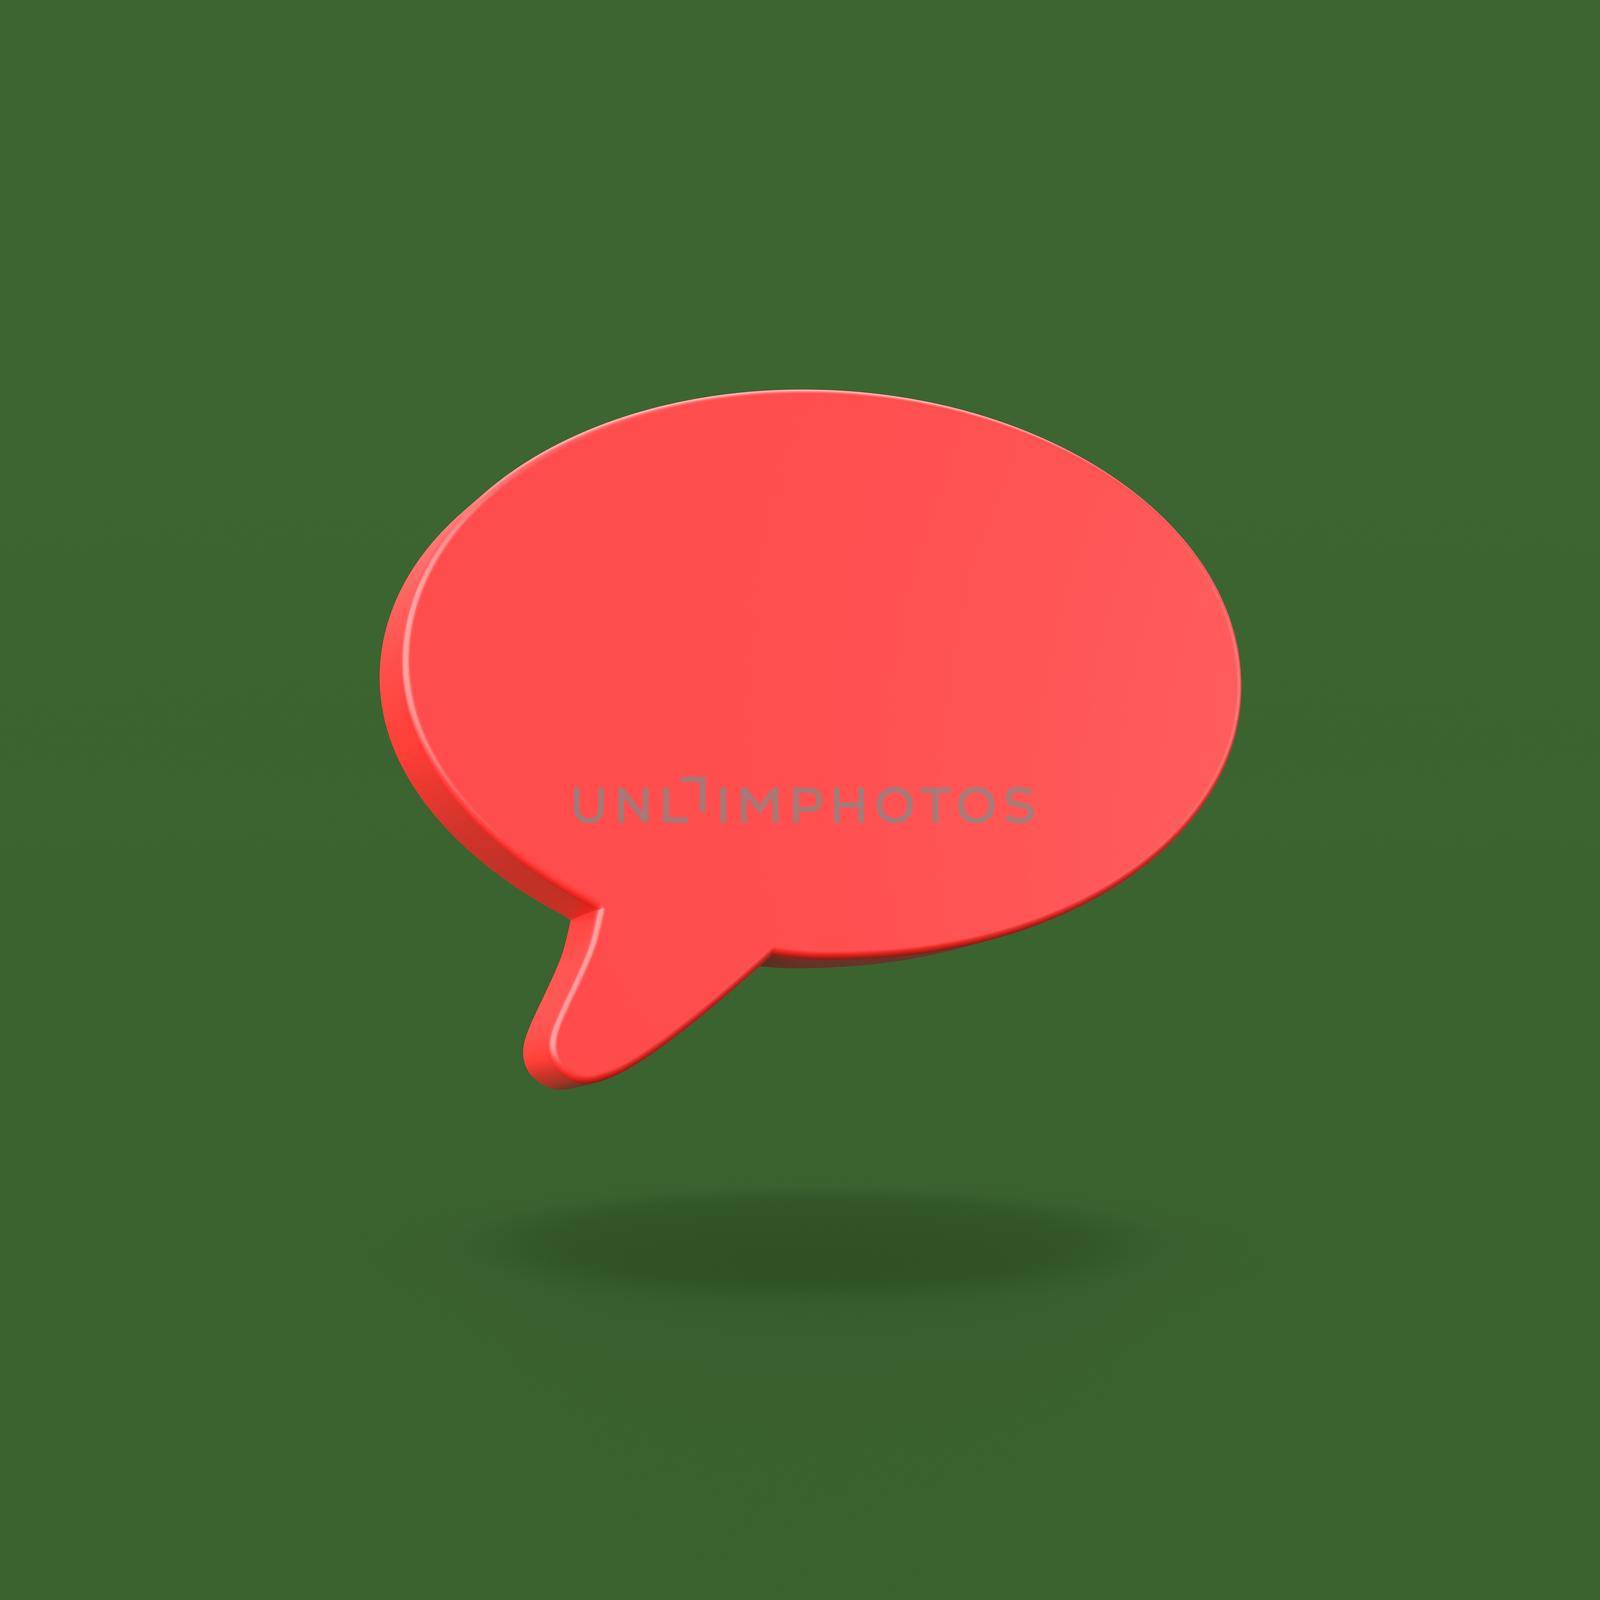 One Comic Red Speech Bubble Shape on Flat Green Background with Shadow 3D Illustration